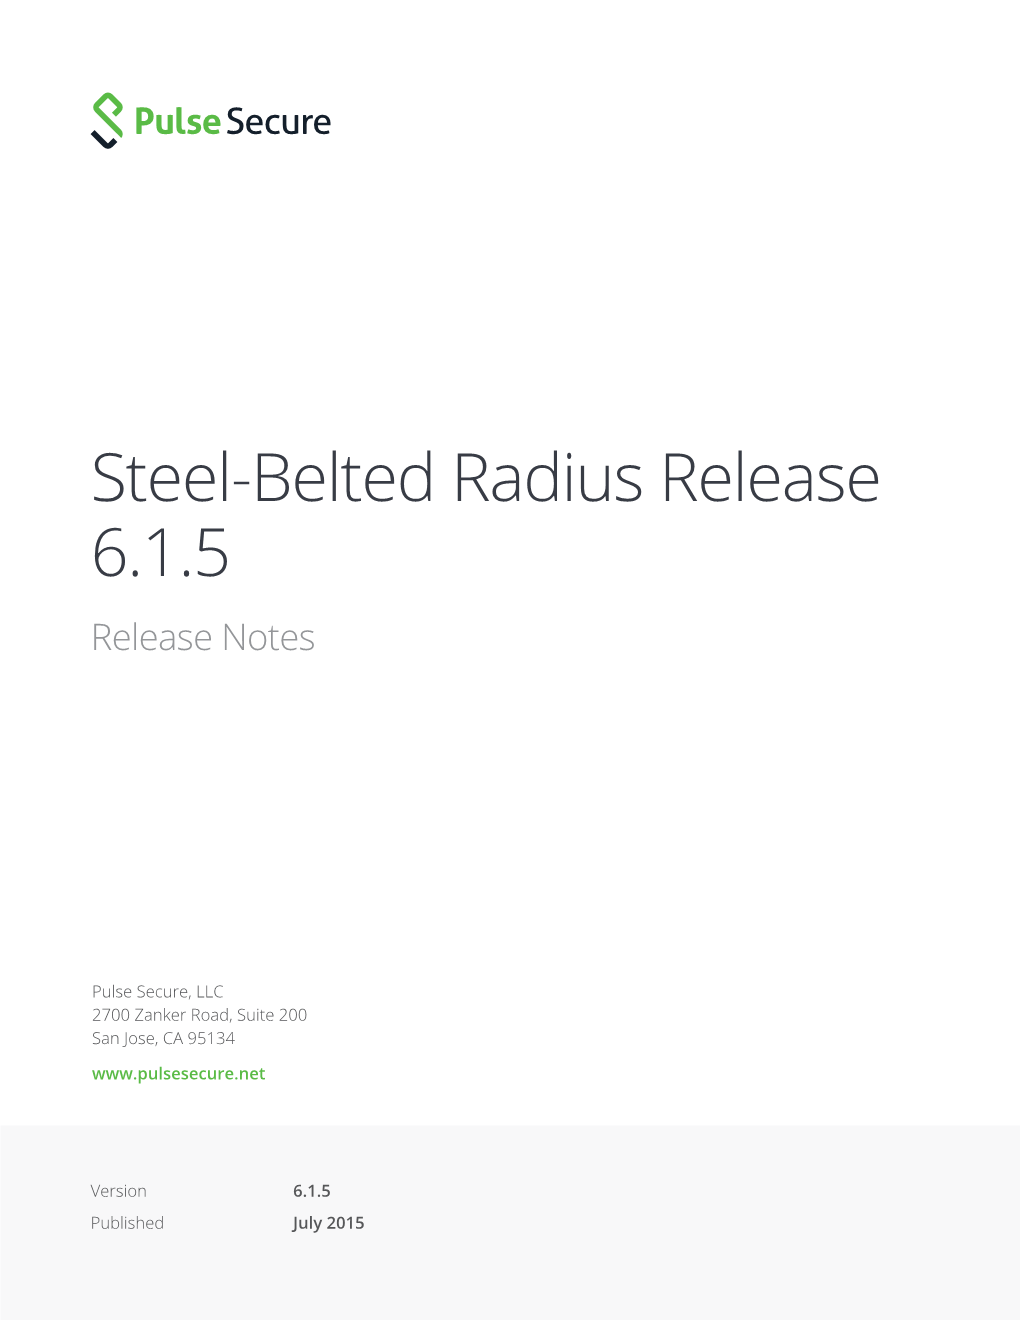 Steel-Belted Radius Release 6.1.5 Release Notes